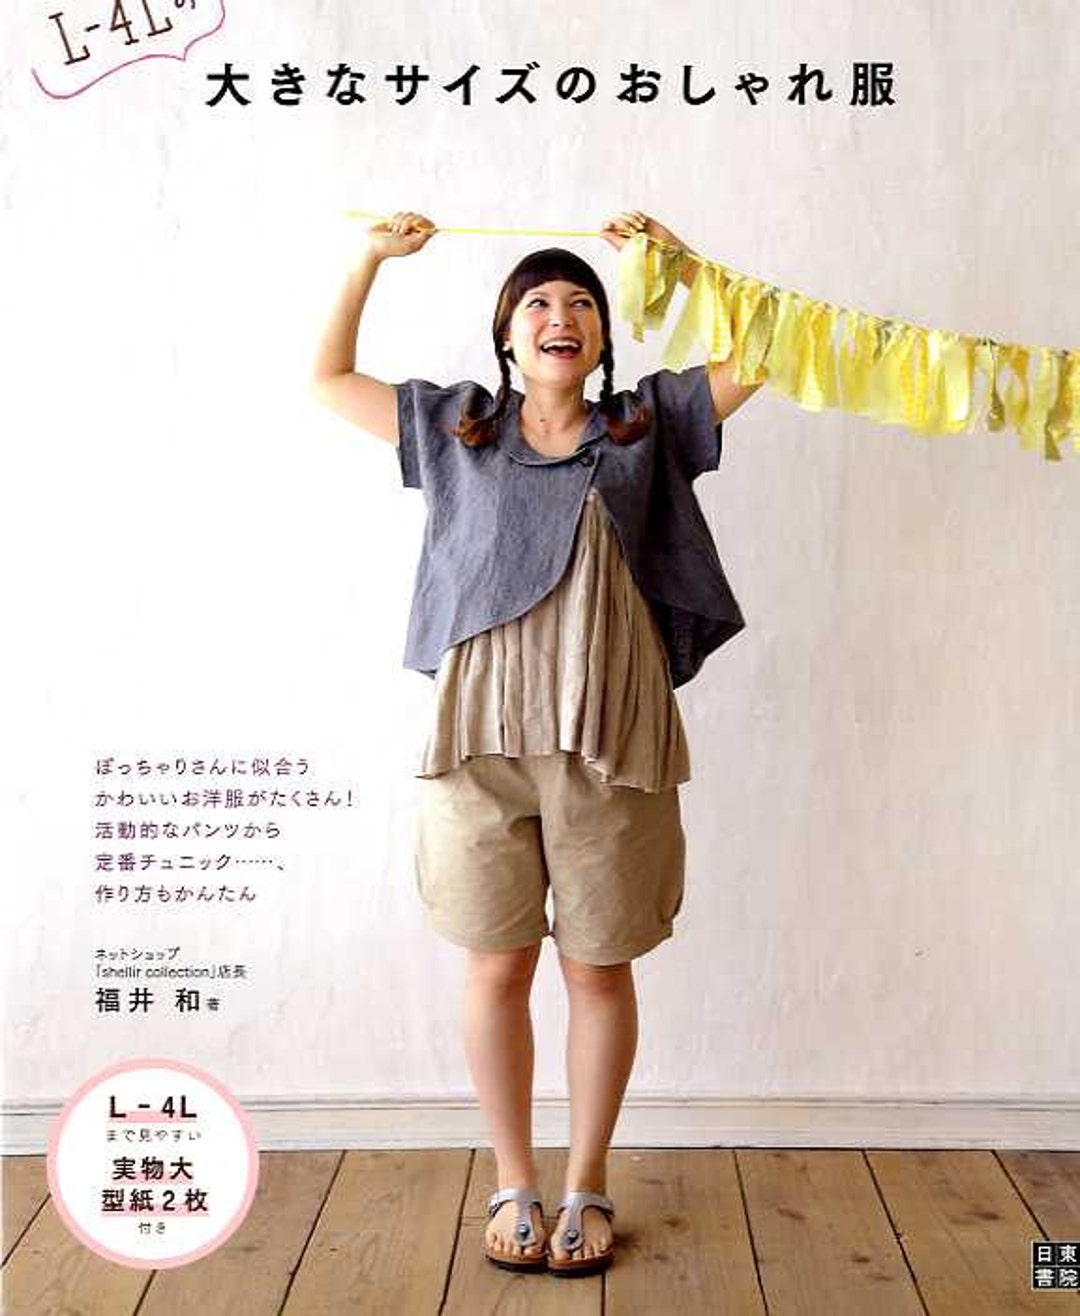 Oshare Cute Outfit for Chubby Girls Japanese Craft Book MM photo